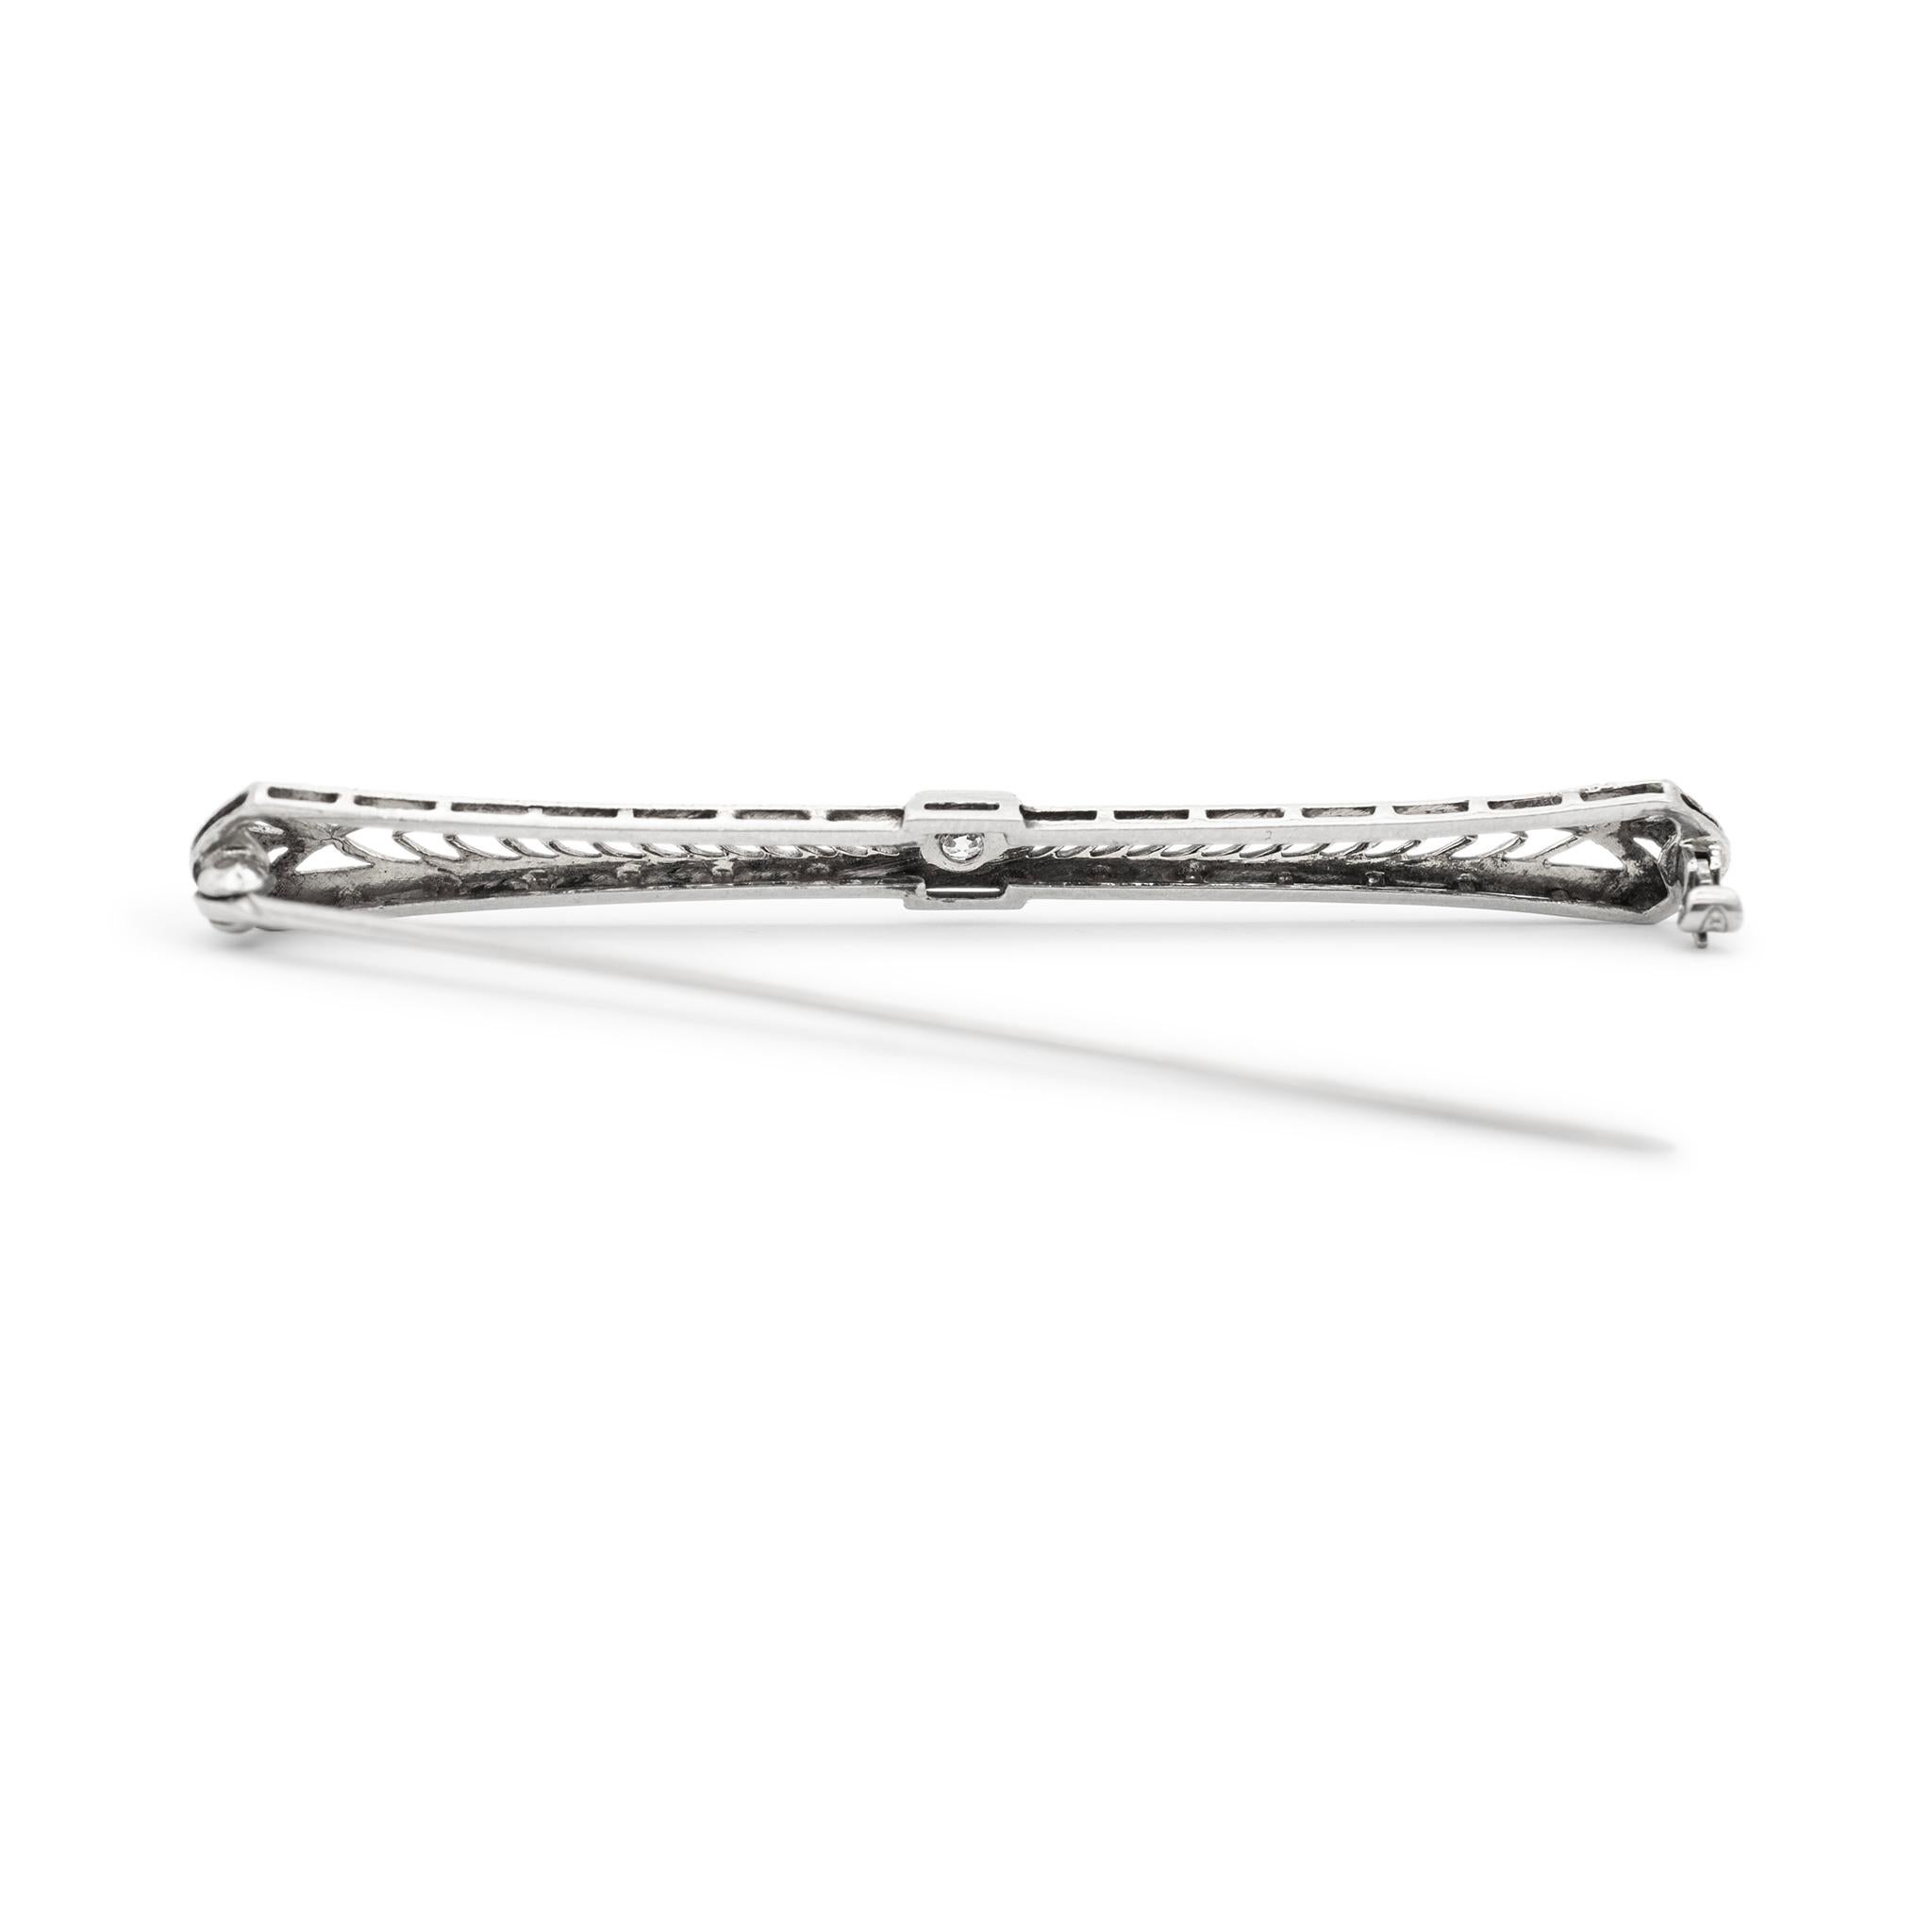 Metal Type: 14K White Gold and Platinum

Length: 2.25 inches

Width: 6.30 mm

Weight: 3.39 grams

Filigreed, 14K white gold and platinum, diamond art-deco (1920-1930) brooch. The metals were tested and determined to be 14K white gold and platinum.